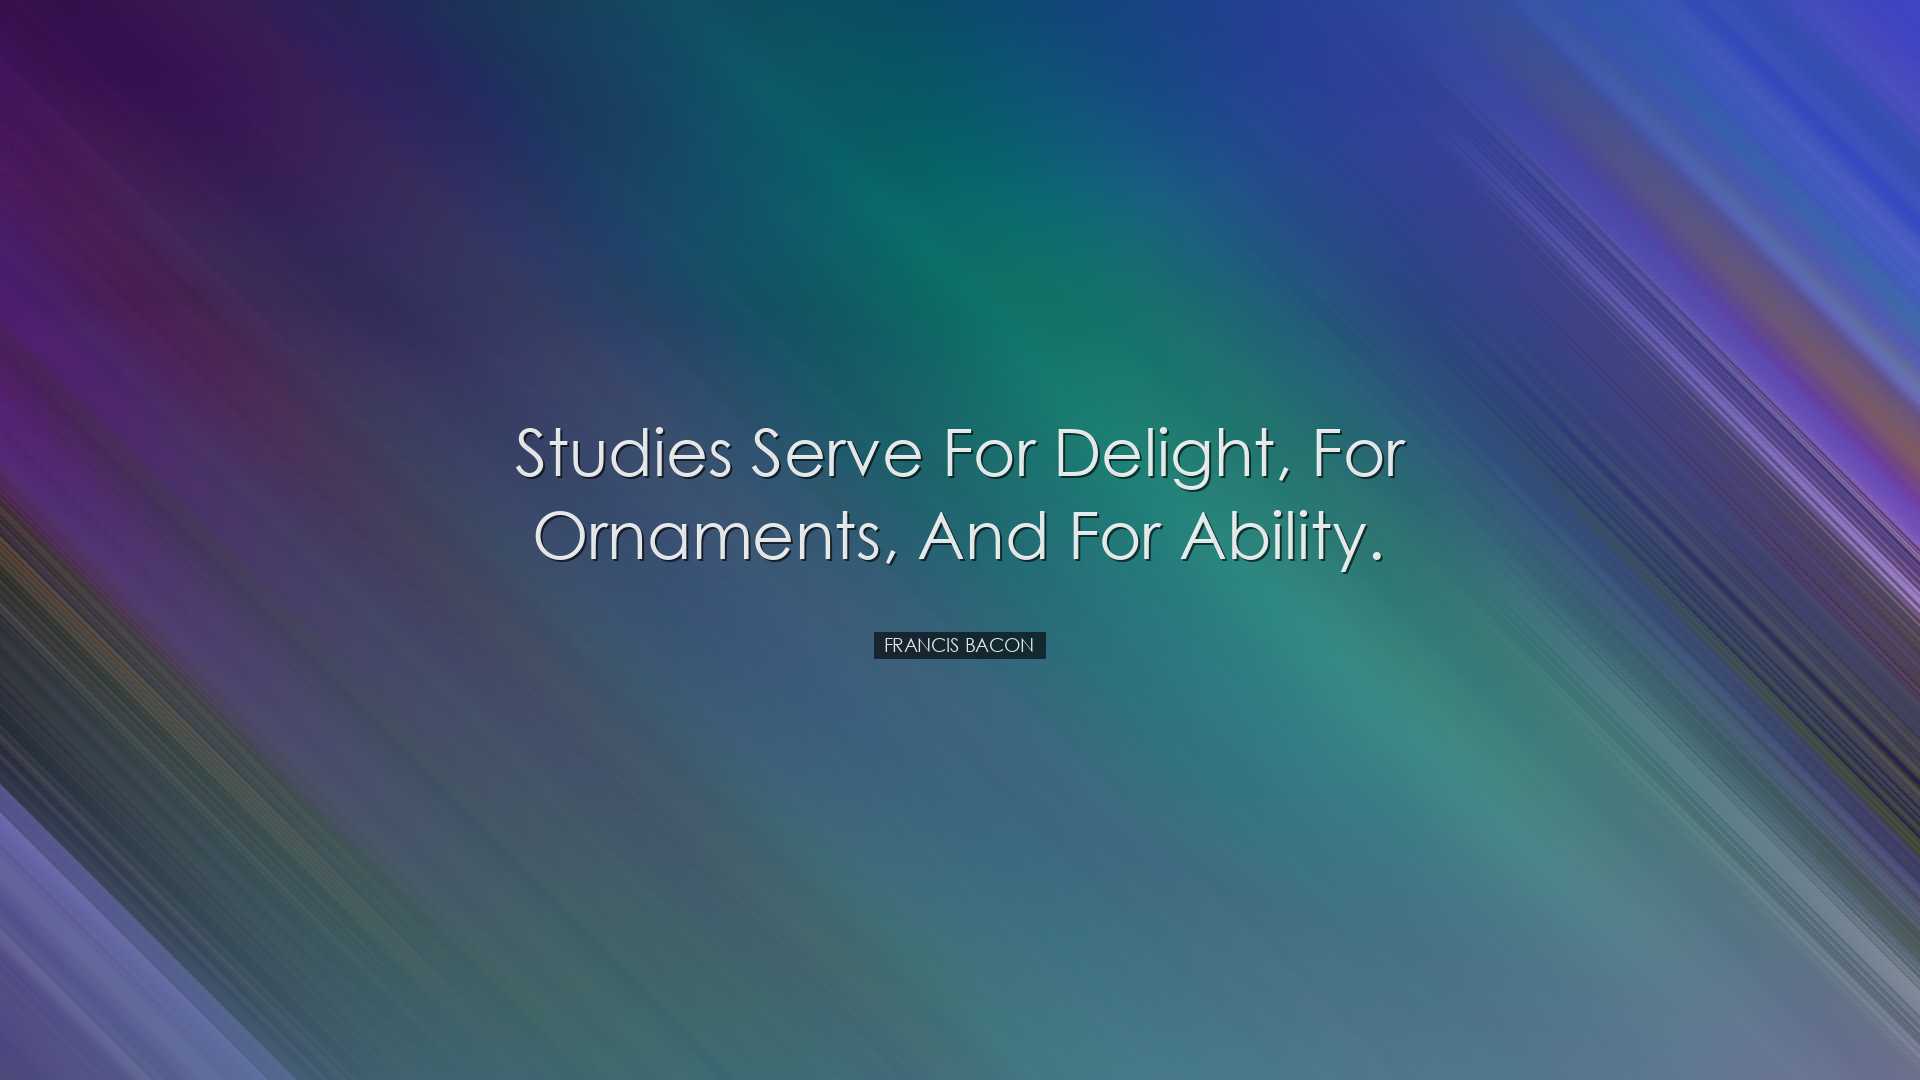 Studies serve for delight, for ornaments, and for ability. - Franc